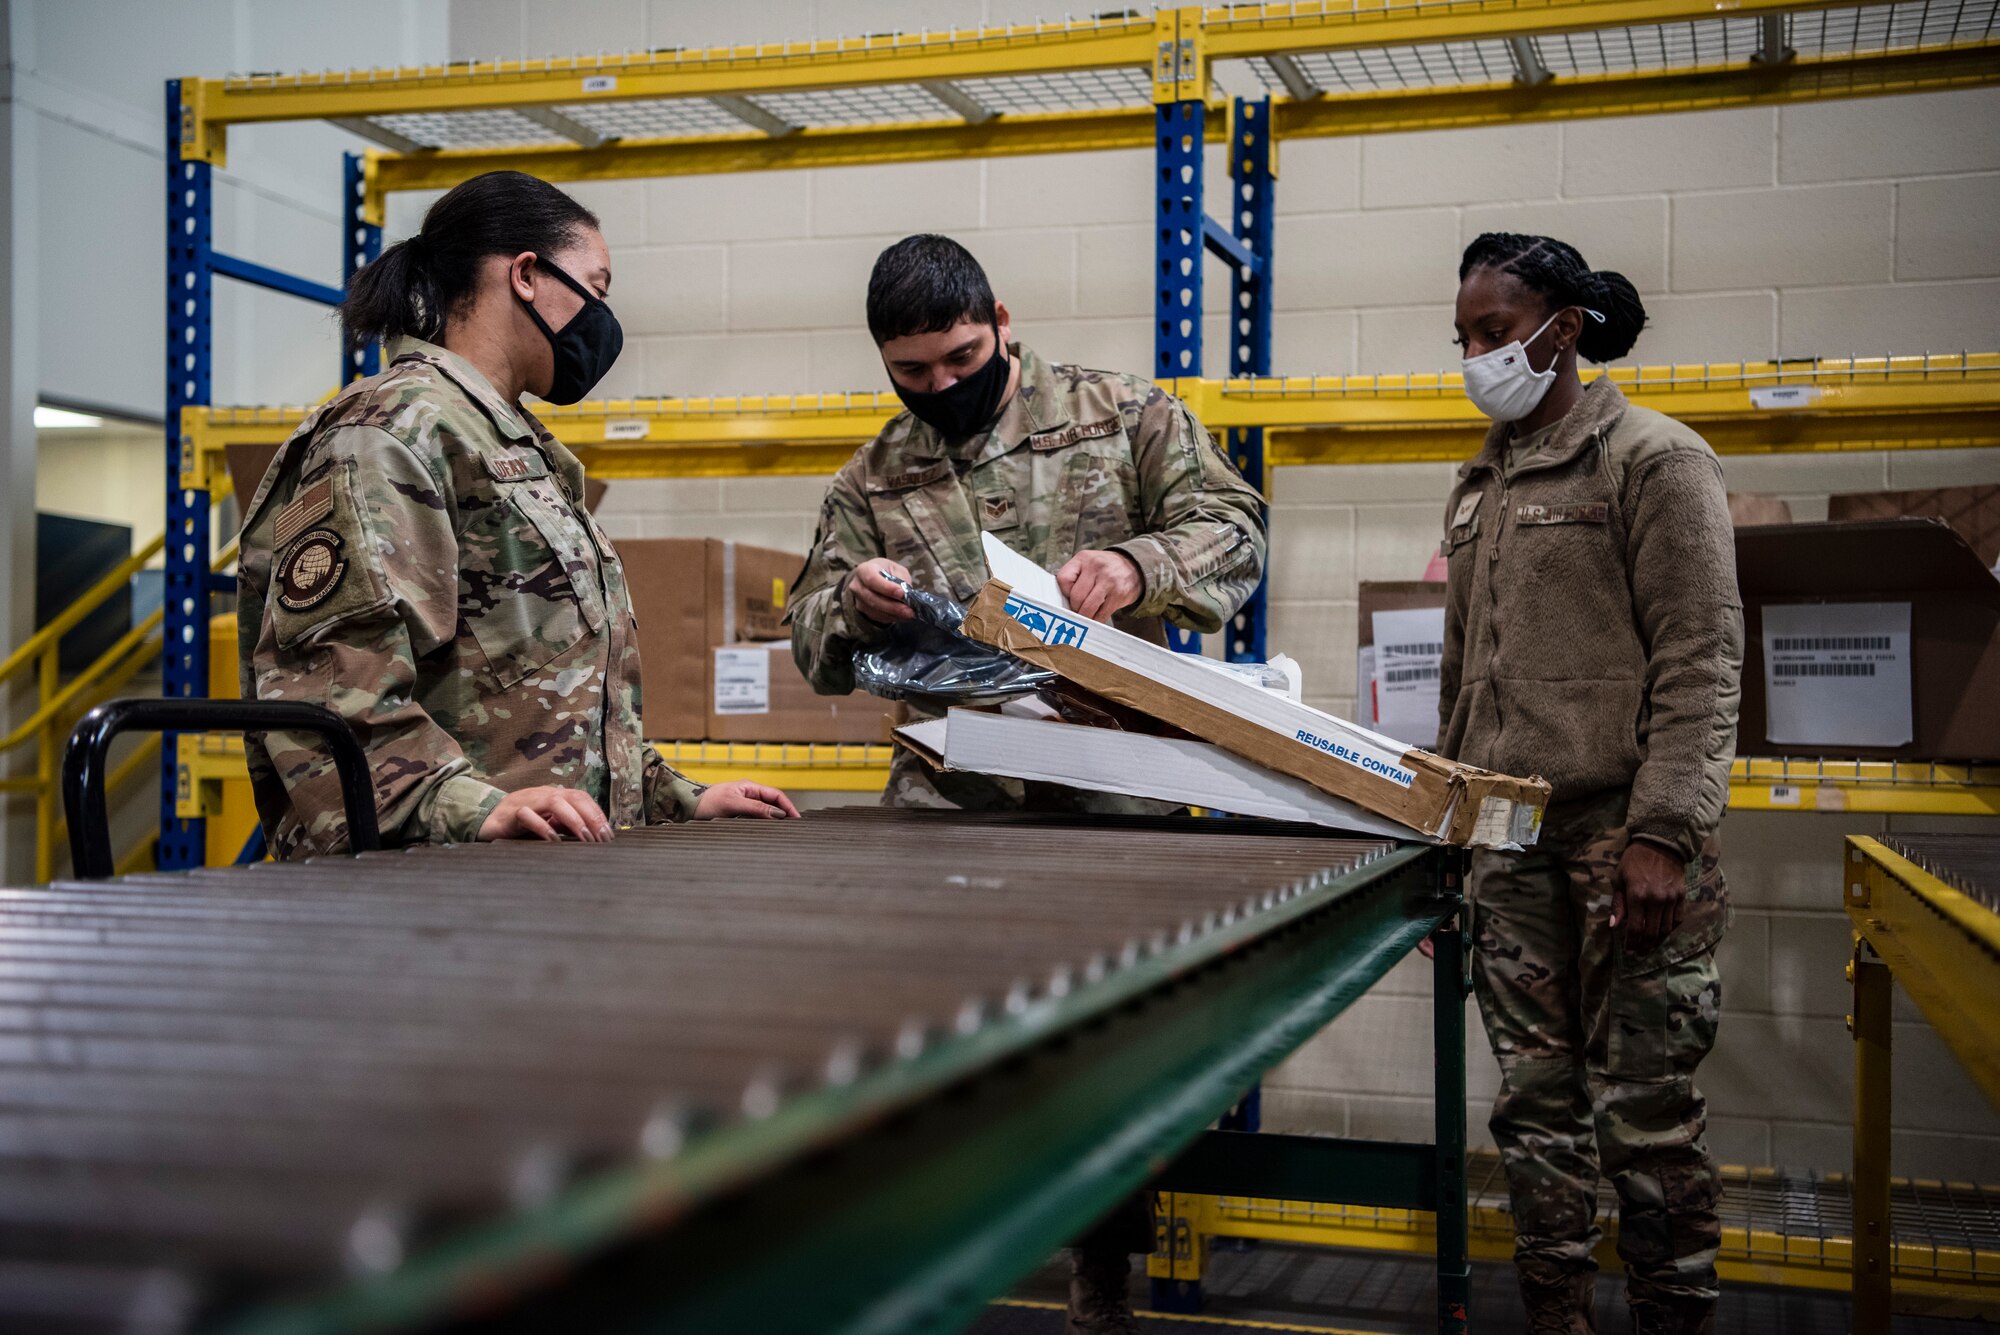 Three Airmen look at a box holding an aircraft part that needs to be repaired.